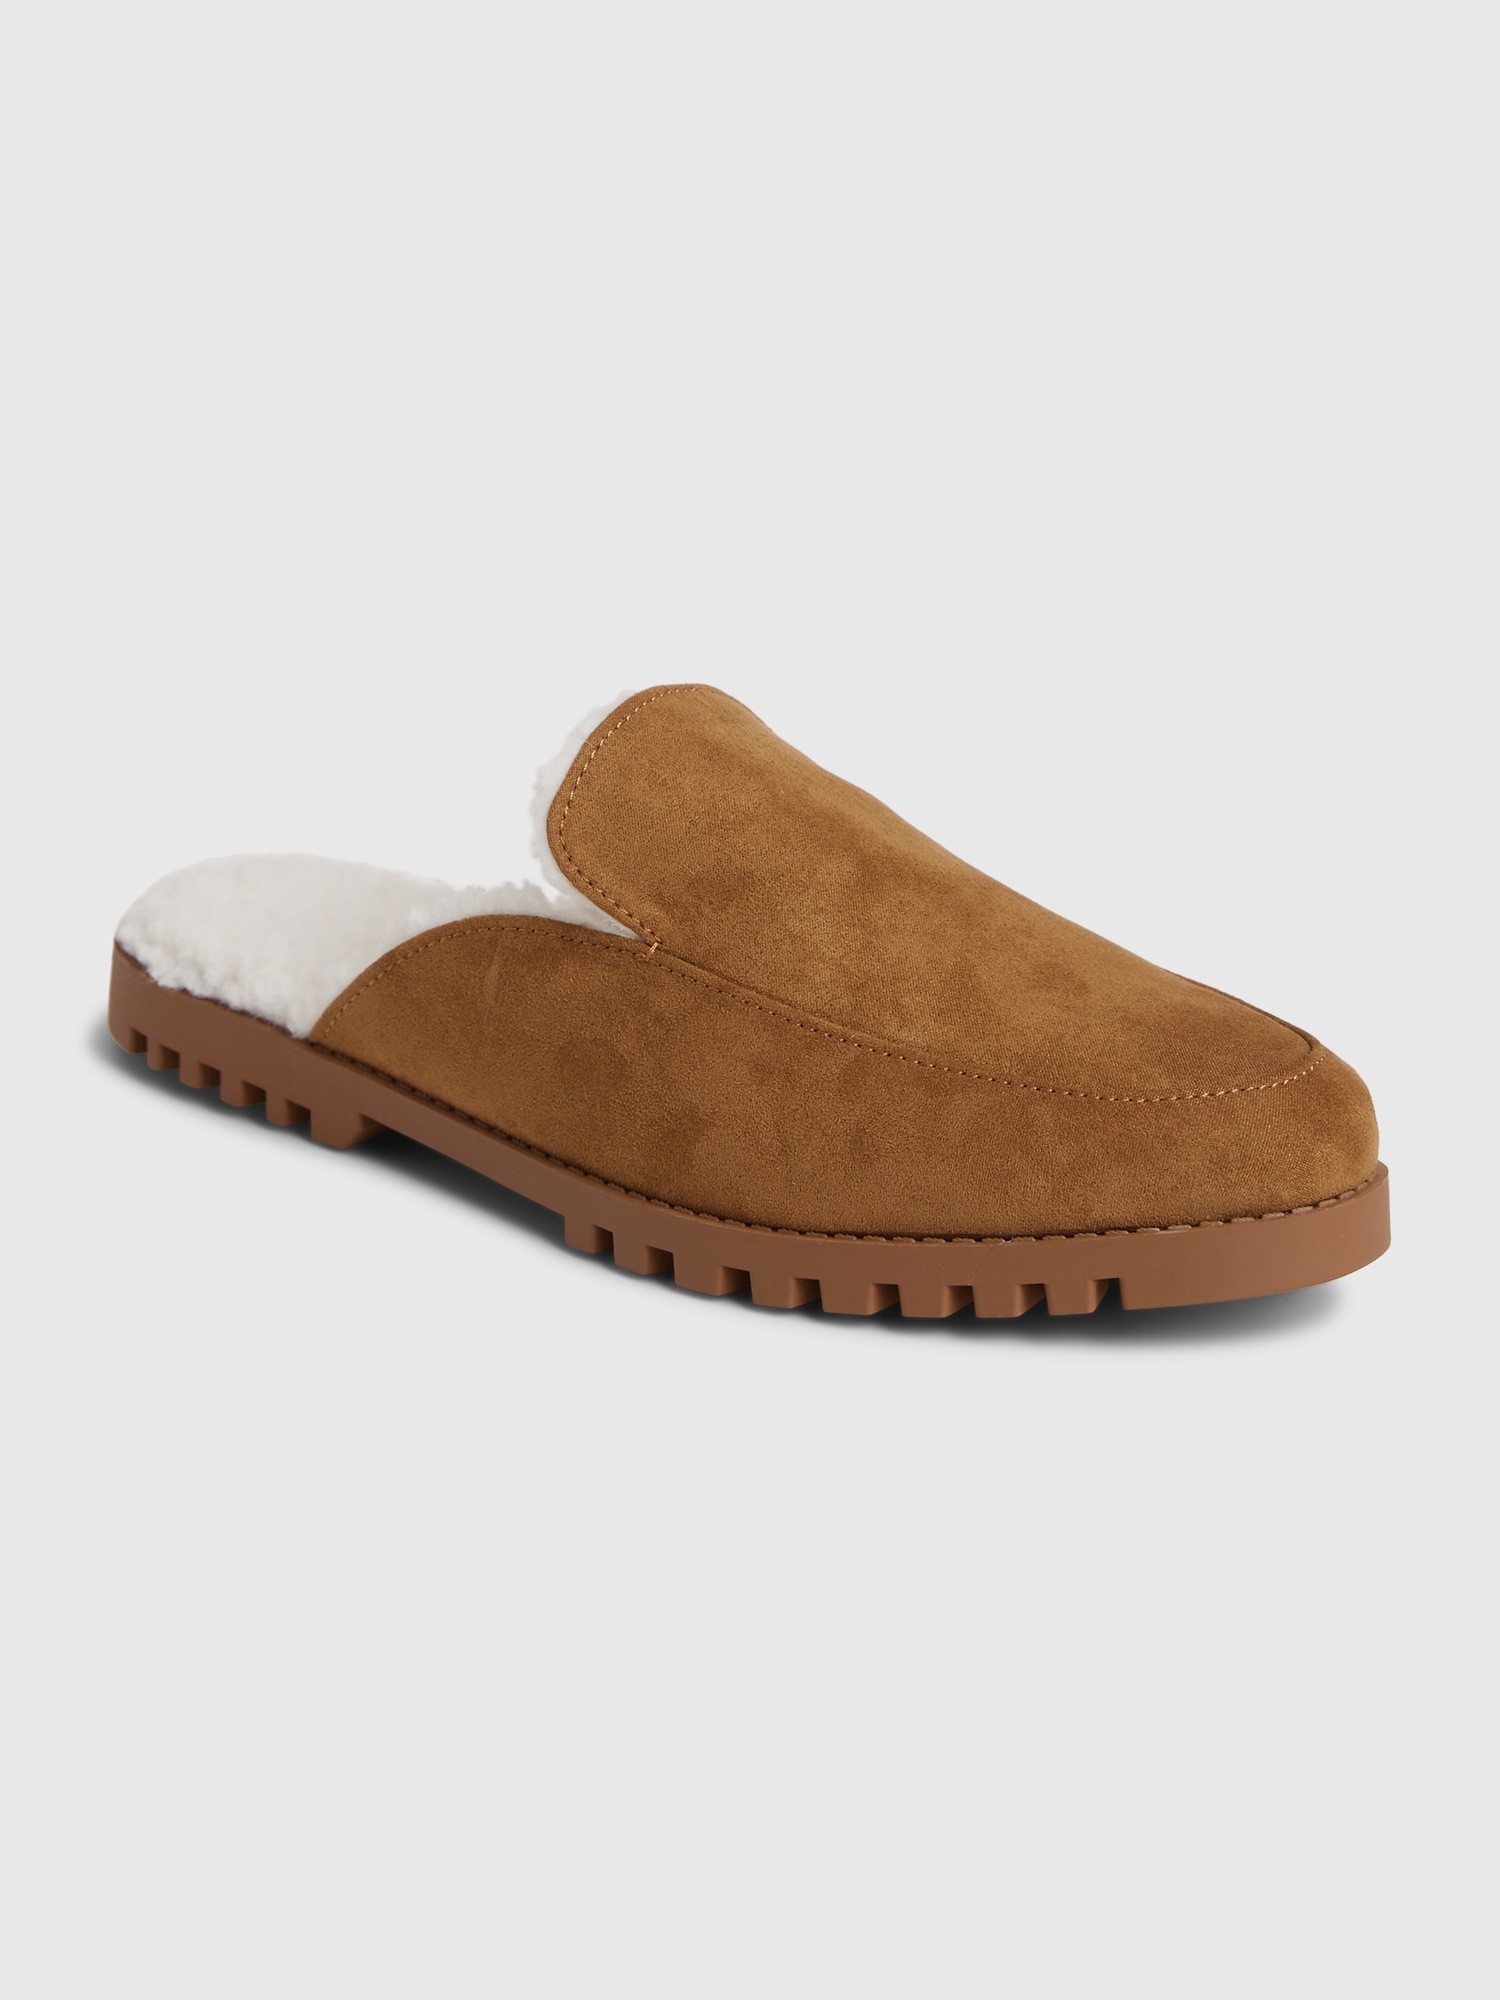 Gap Faux Shearling Loafer Mules brown. 1